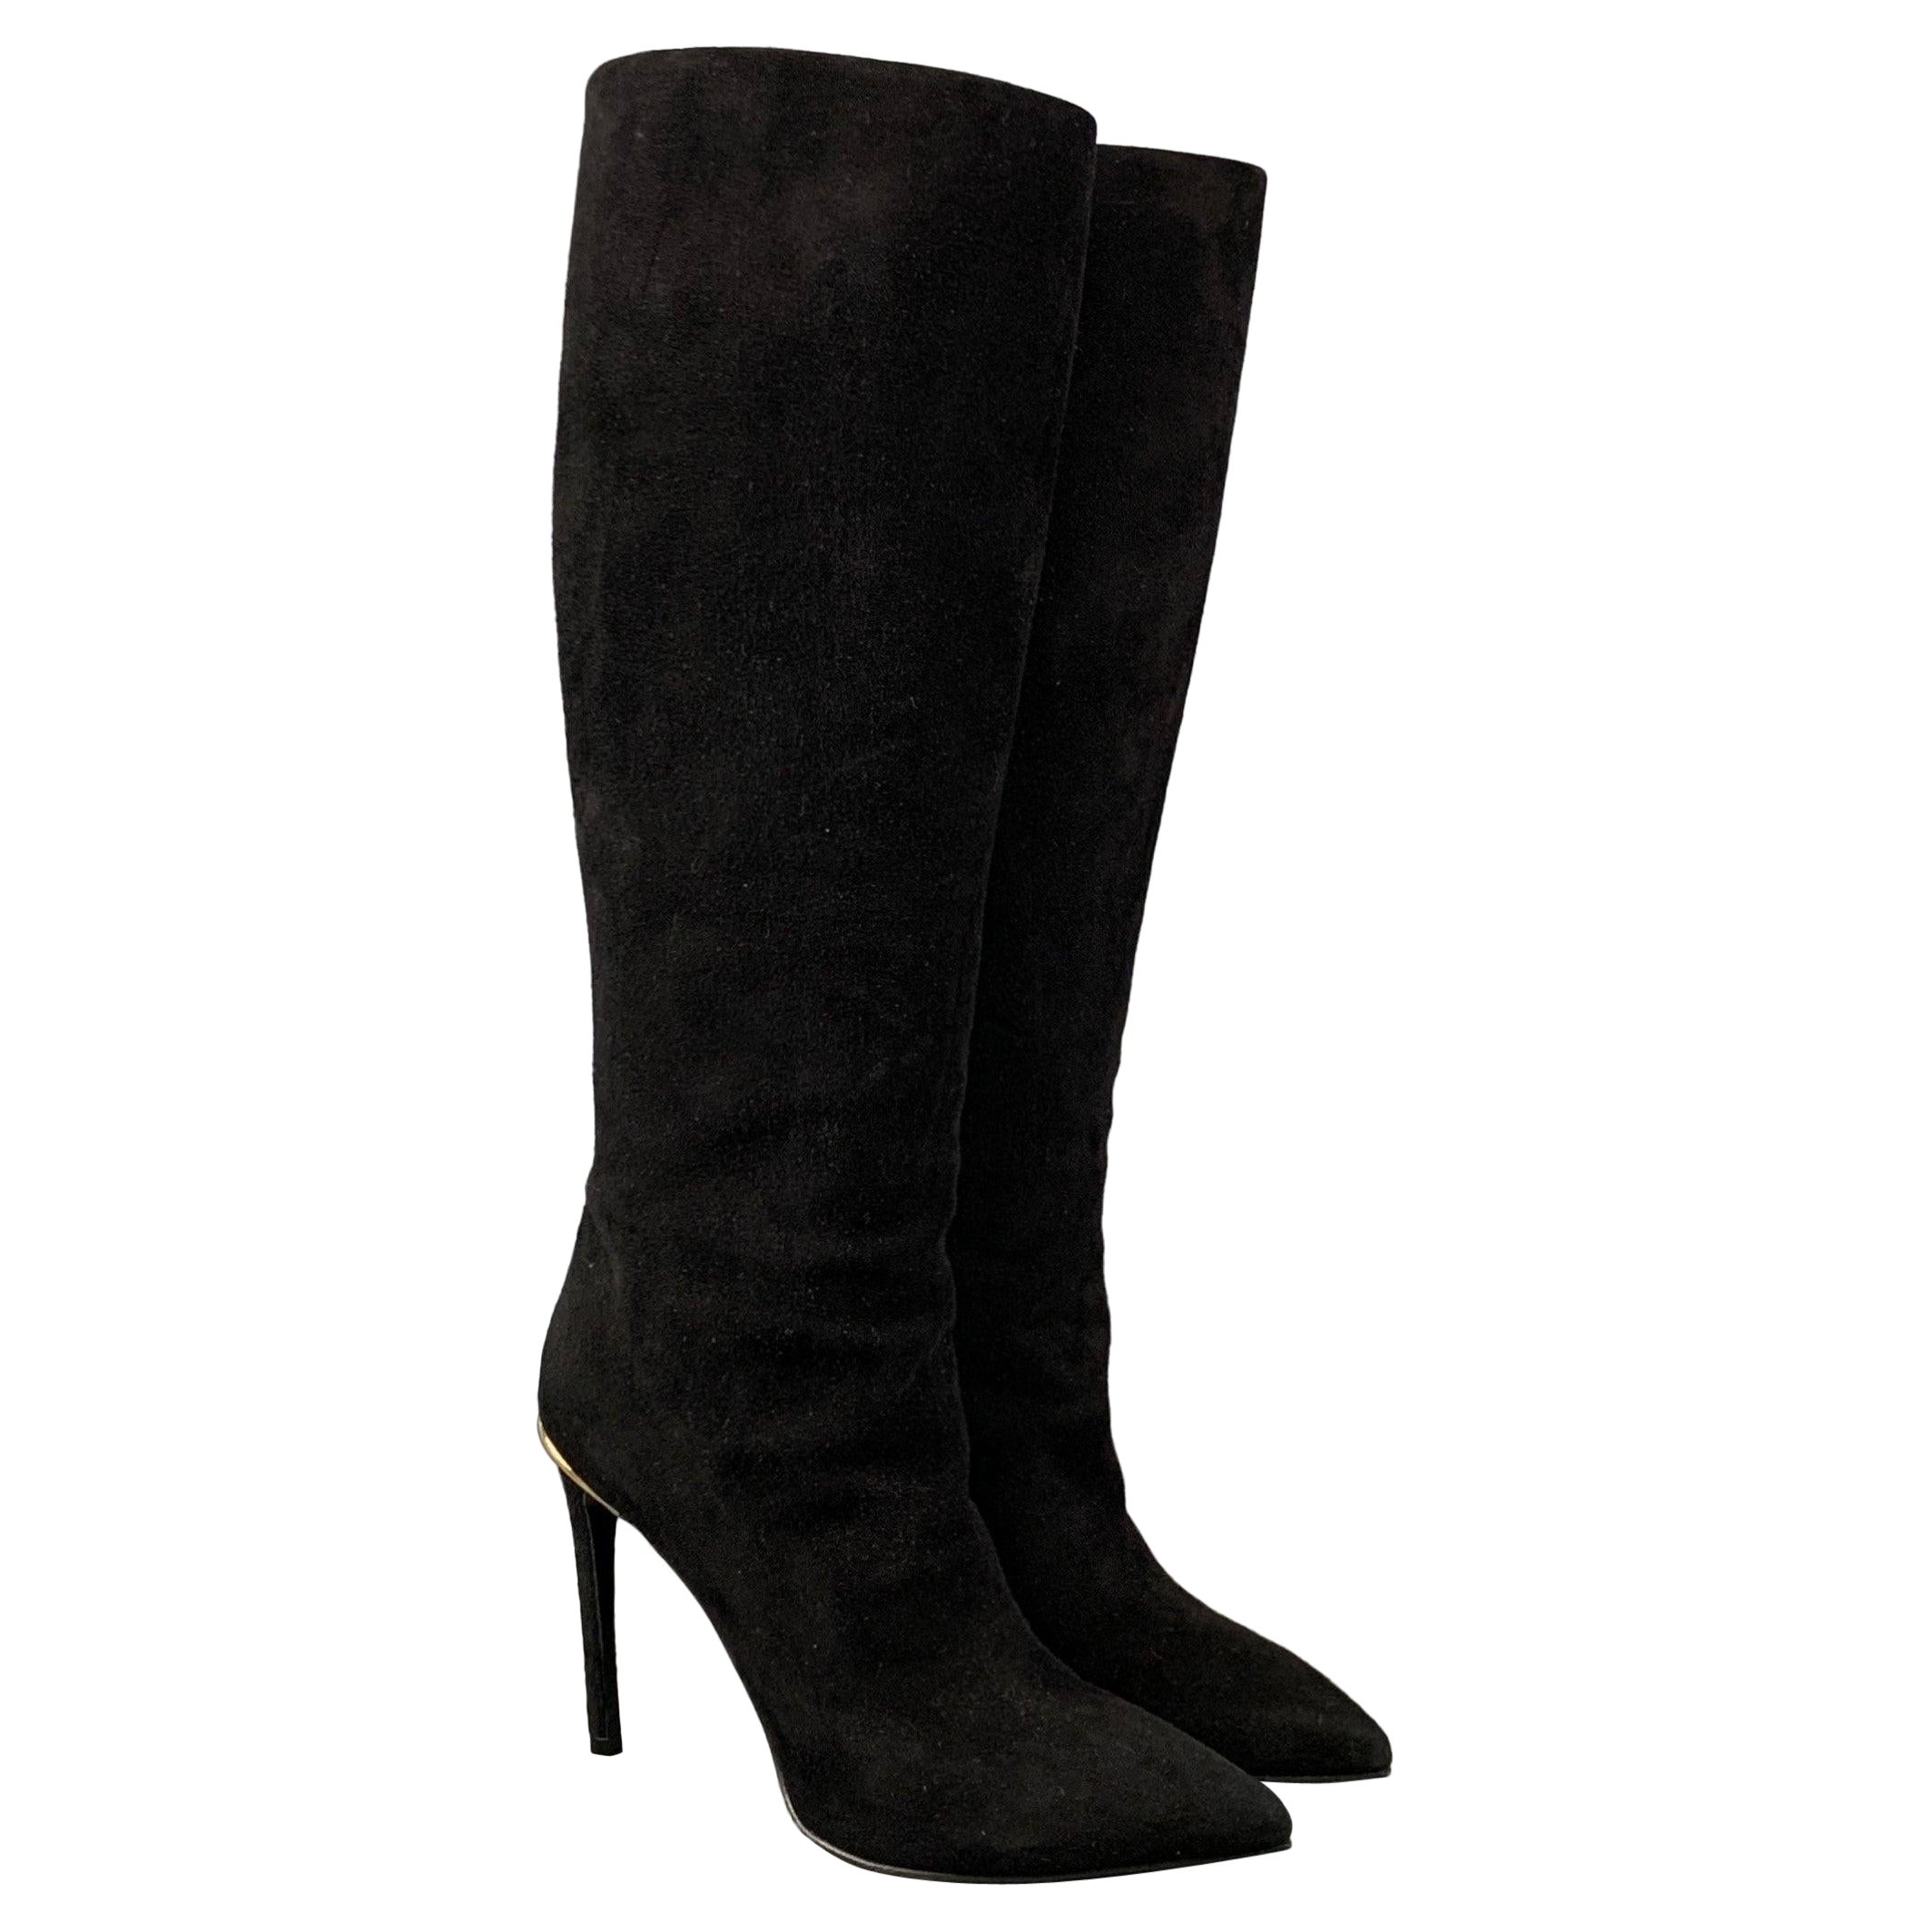 LOUIS VUITTON Size 7 Black Suede Pull On Boots For Sale